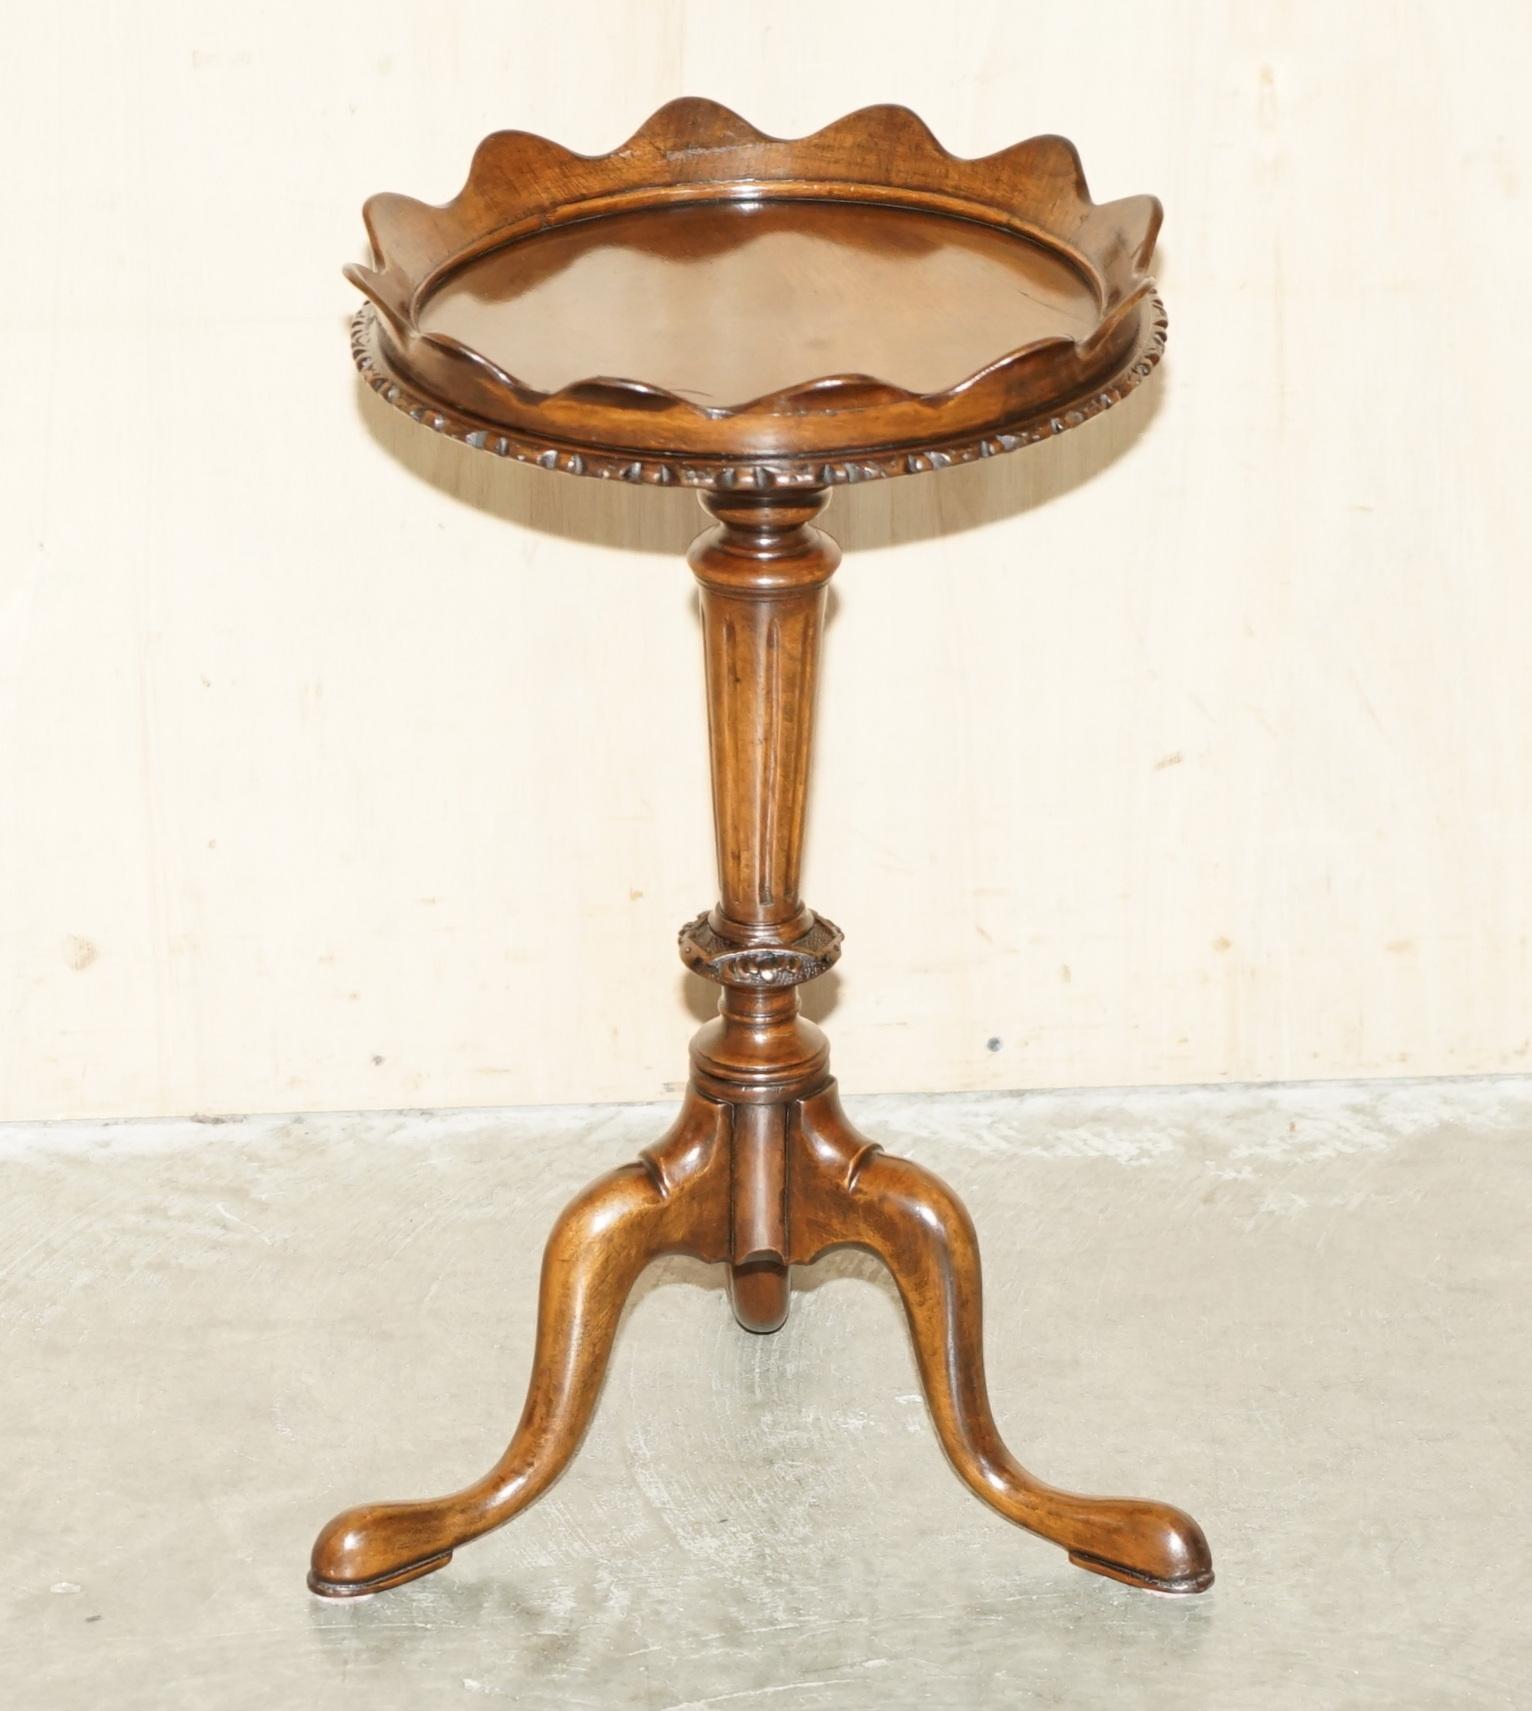 Royal House Antiques

Royal House Antiques is delighted to offer for sale this very fine antique Circa 1900-1920 Thomas Chippendale taste, Mahogany pie crust edge Kettle stand or tripod table 

Please note the delivery fee listed is just a guide, it